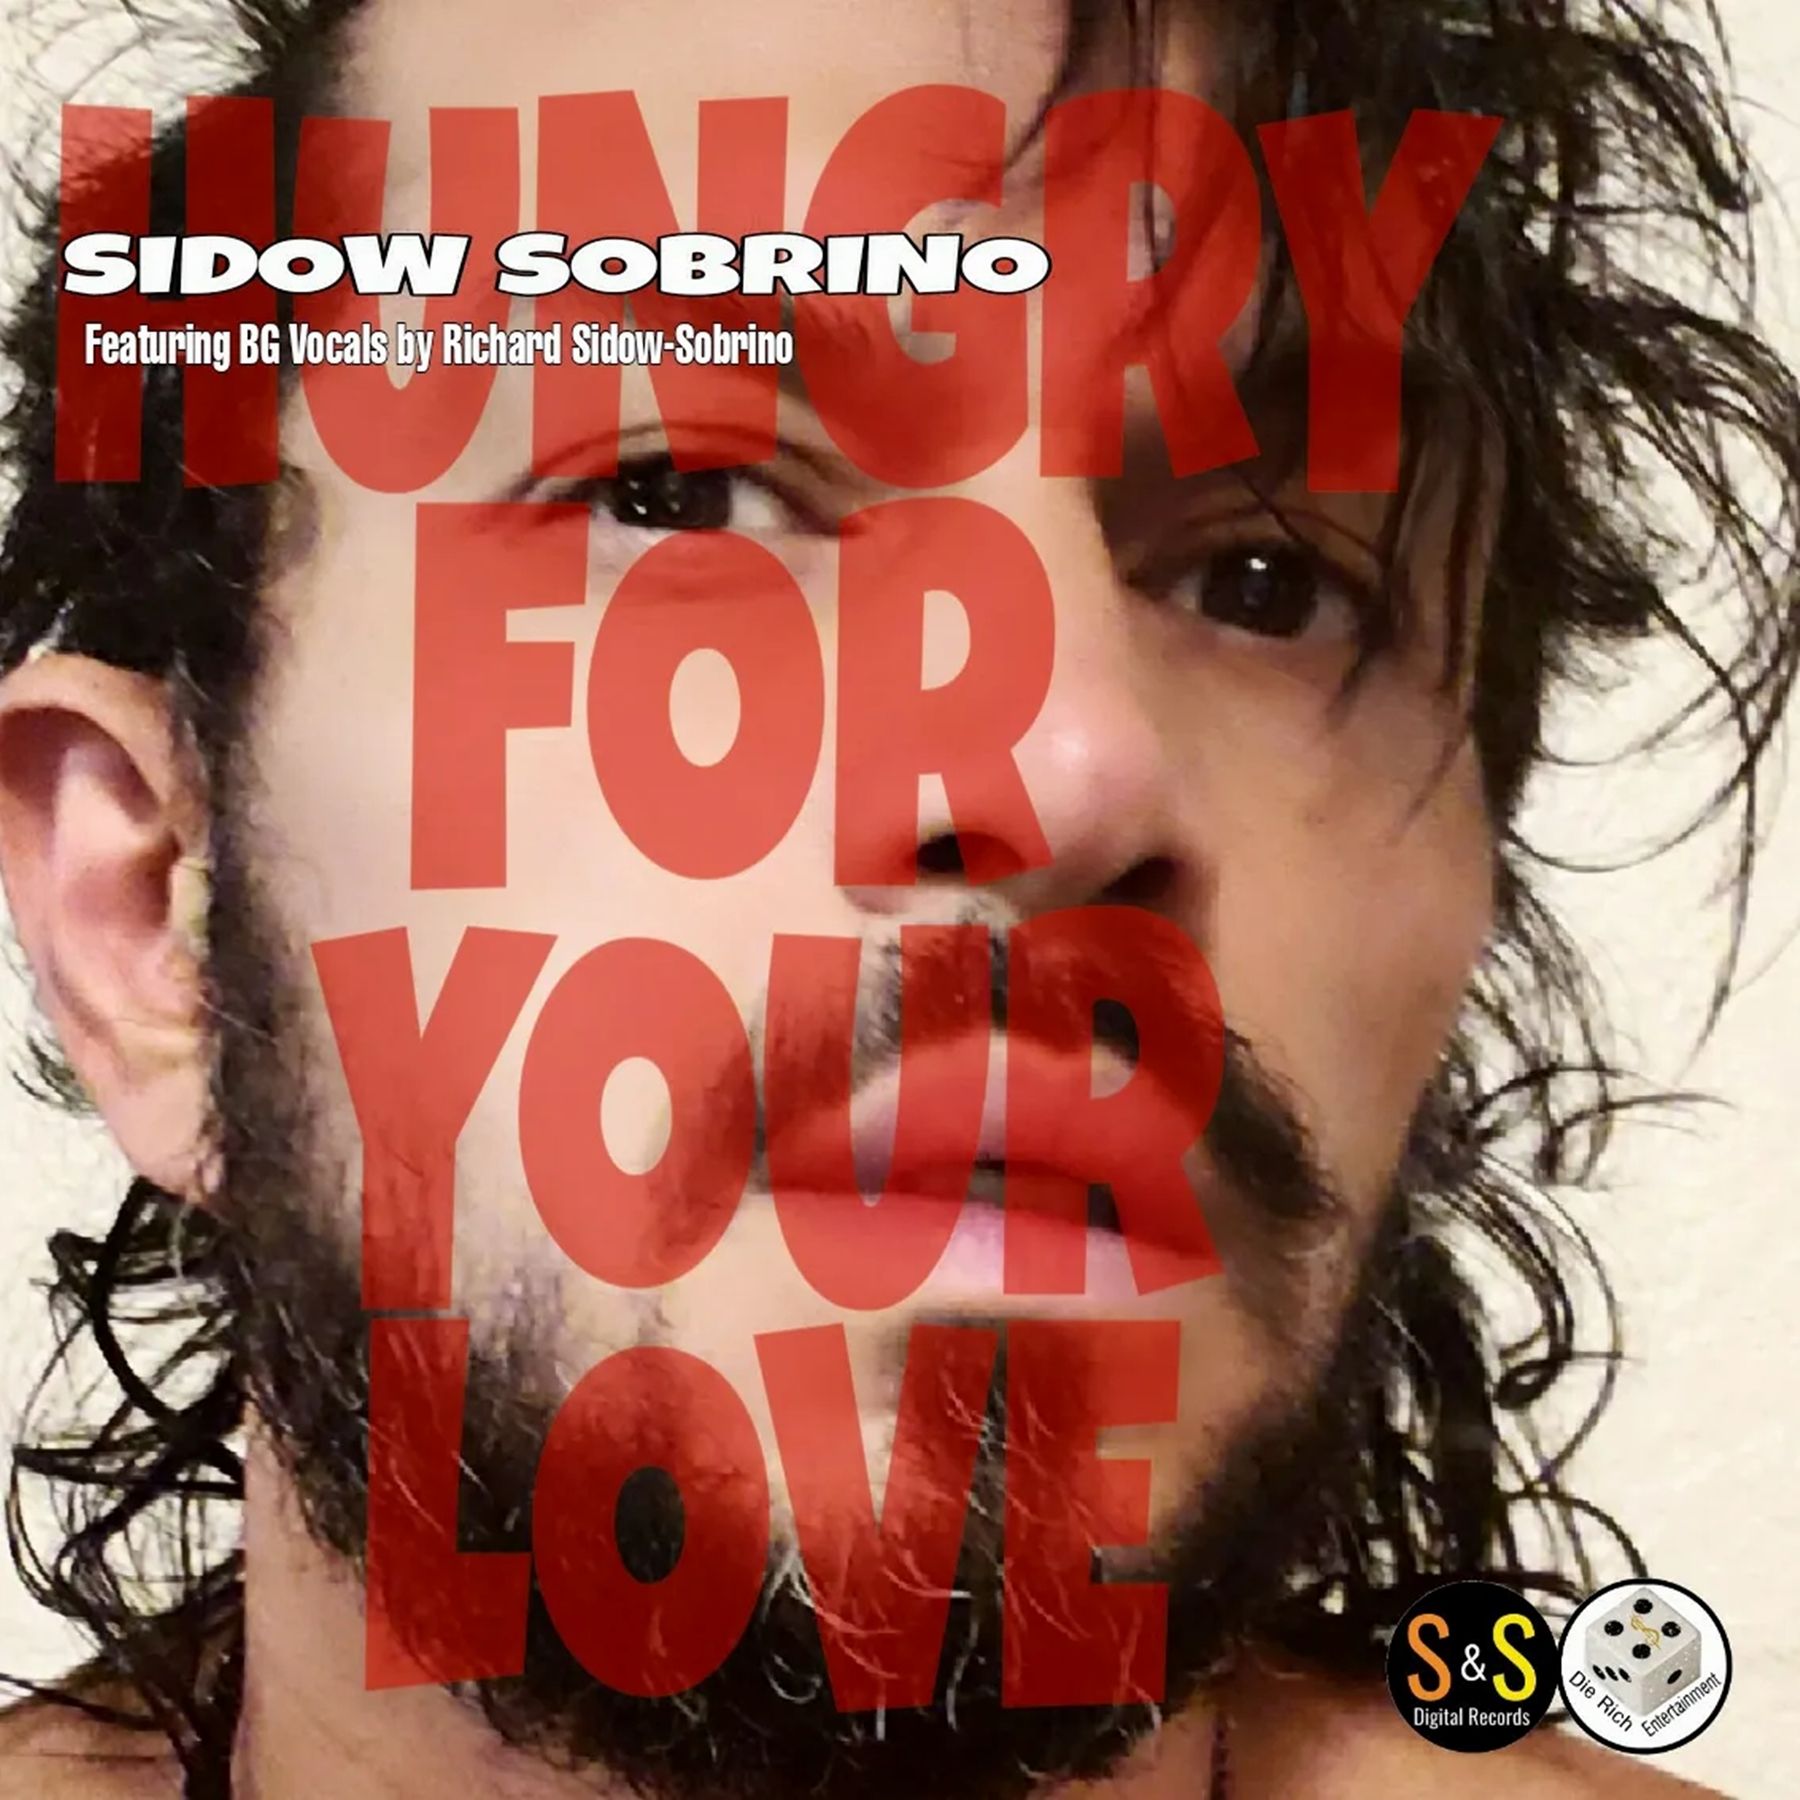 Sidow Sobrino Hungry For Your Love Art Cover